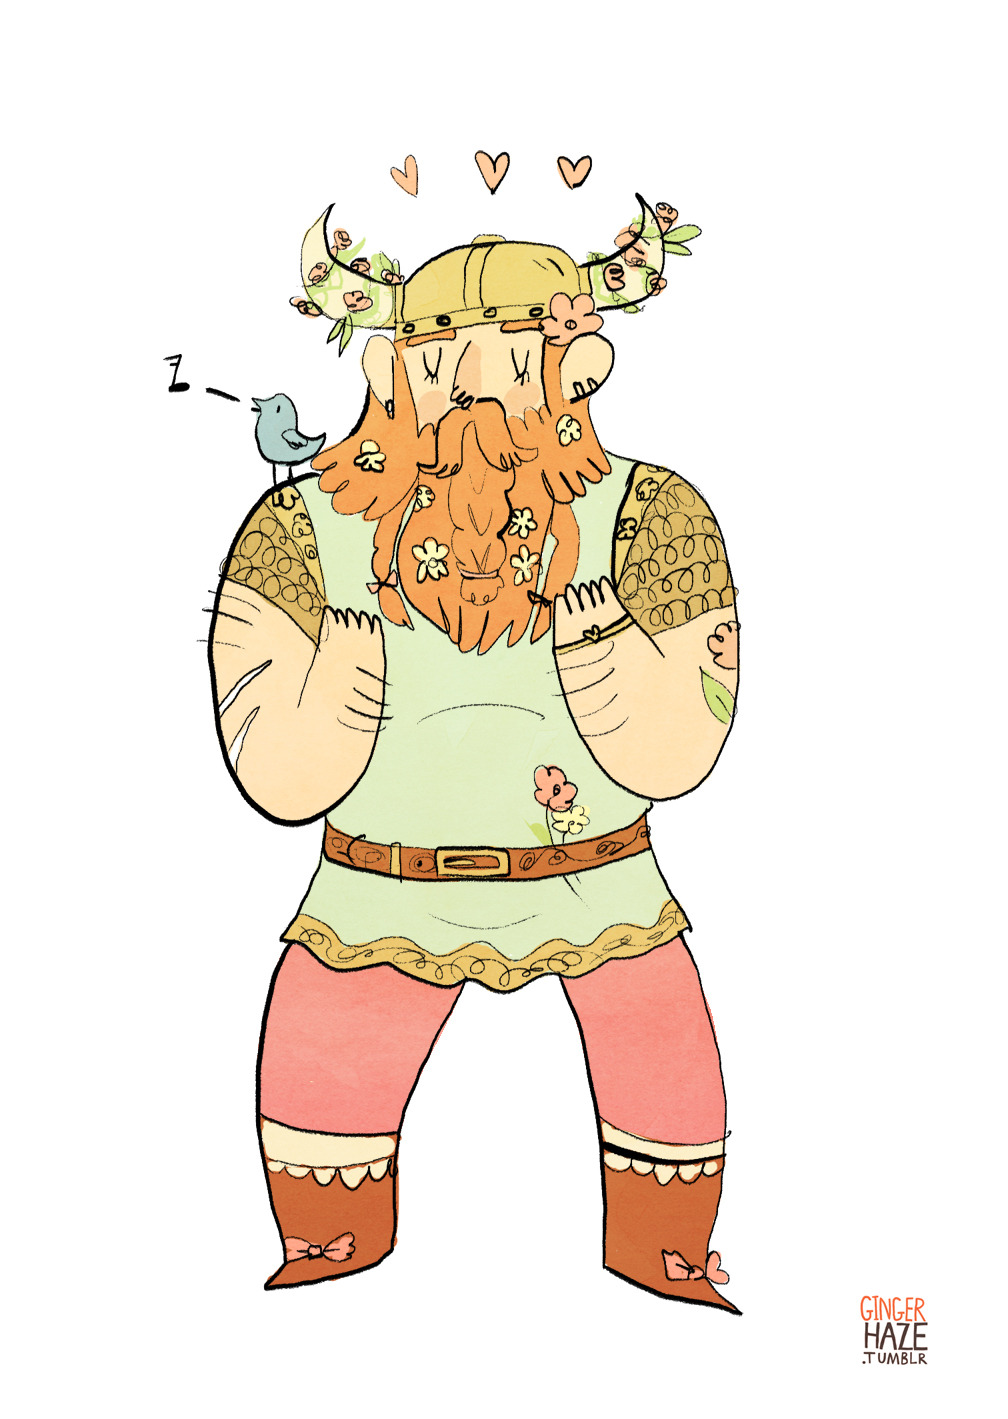 gingerhaze:
“ i drew a gentle flower viking inspired by Guys with Fancy Lady Hair
”
Redhead viking